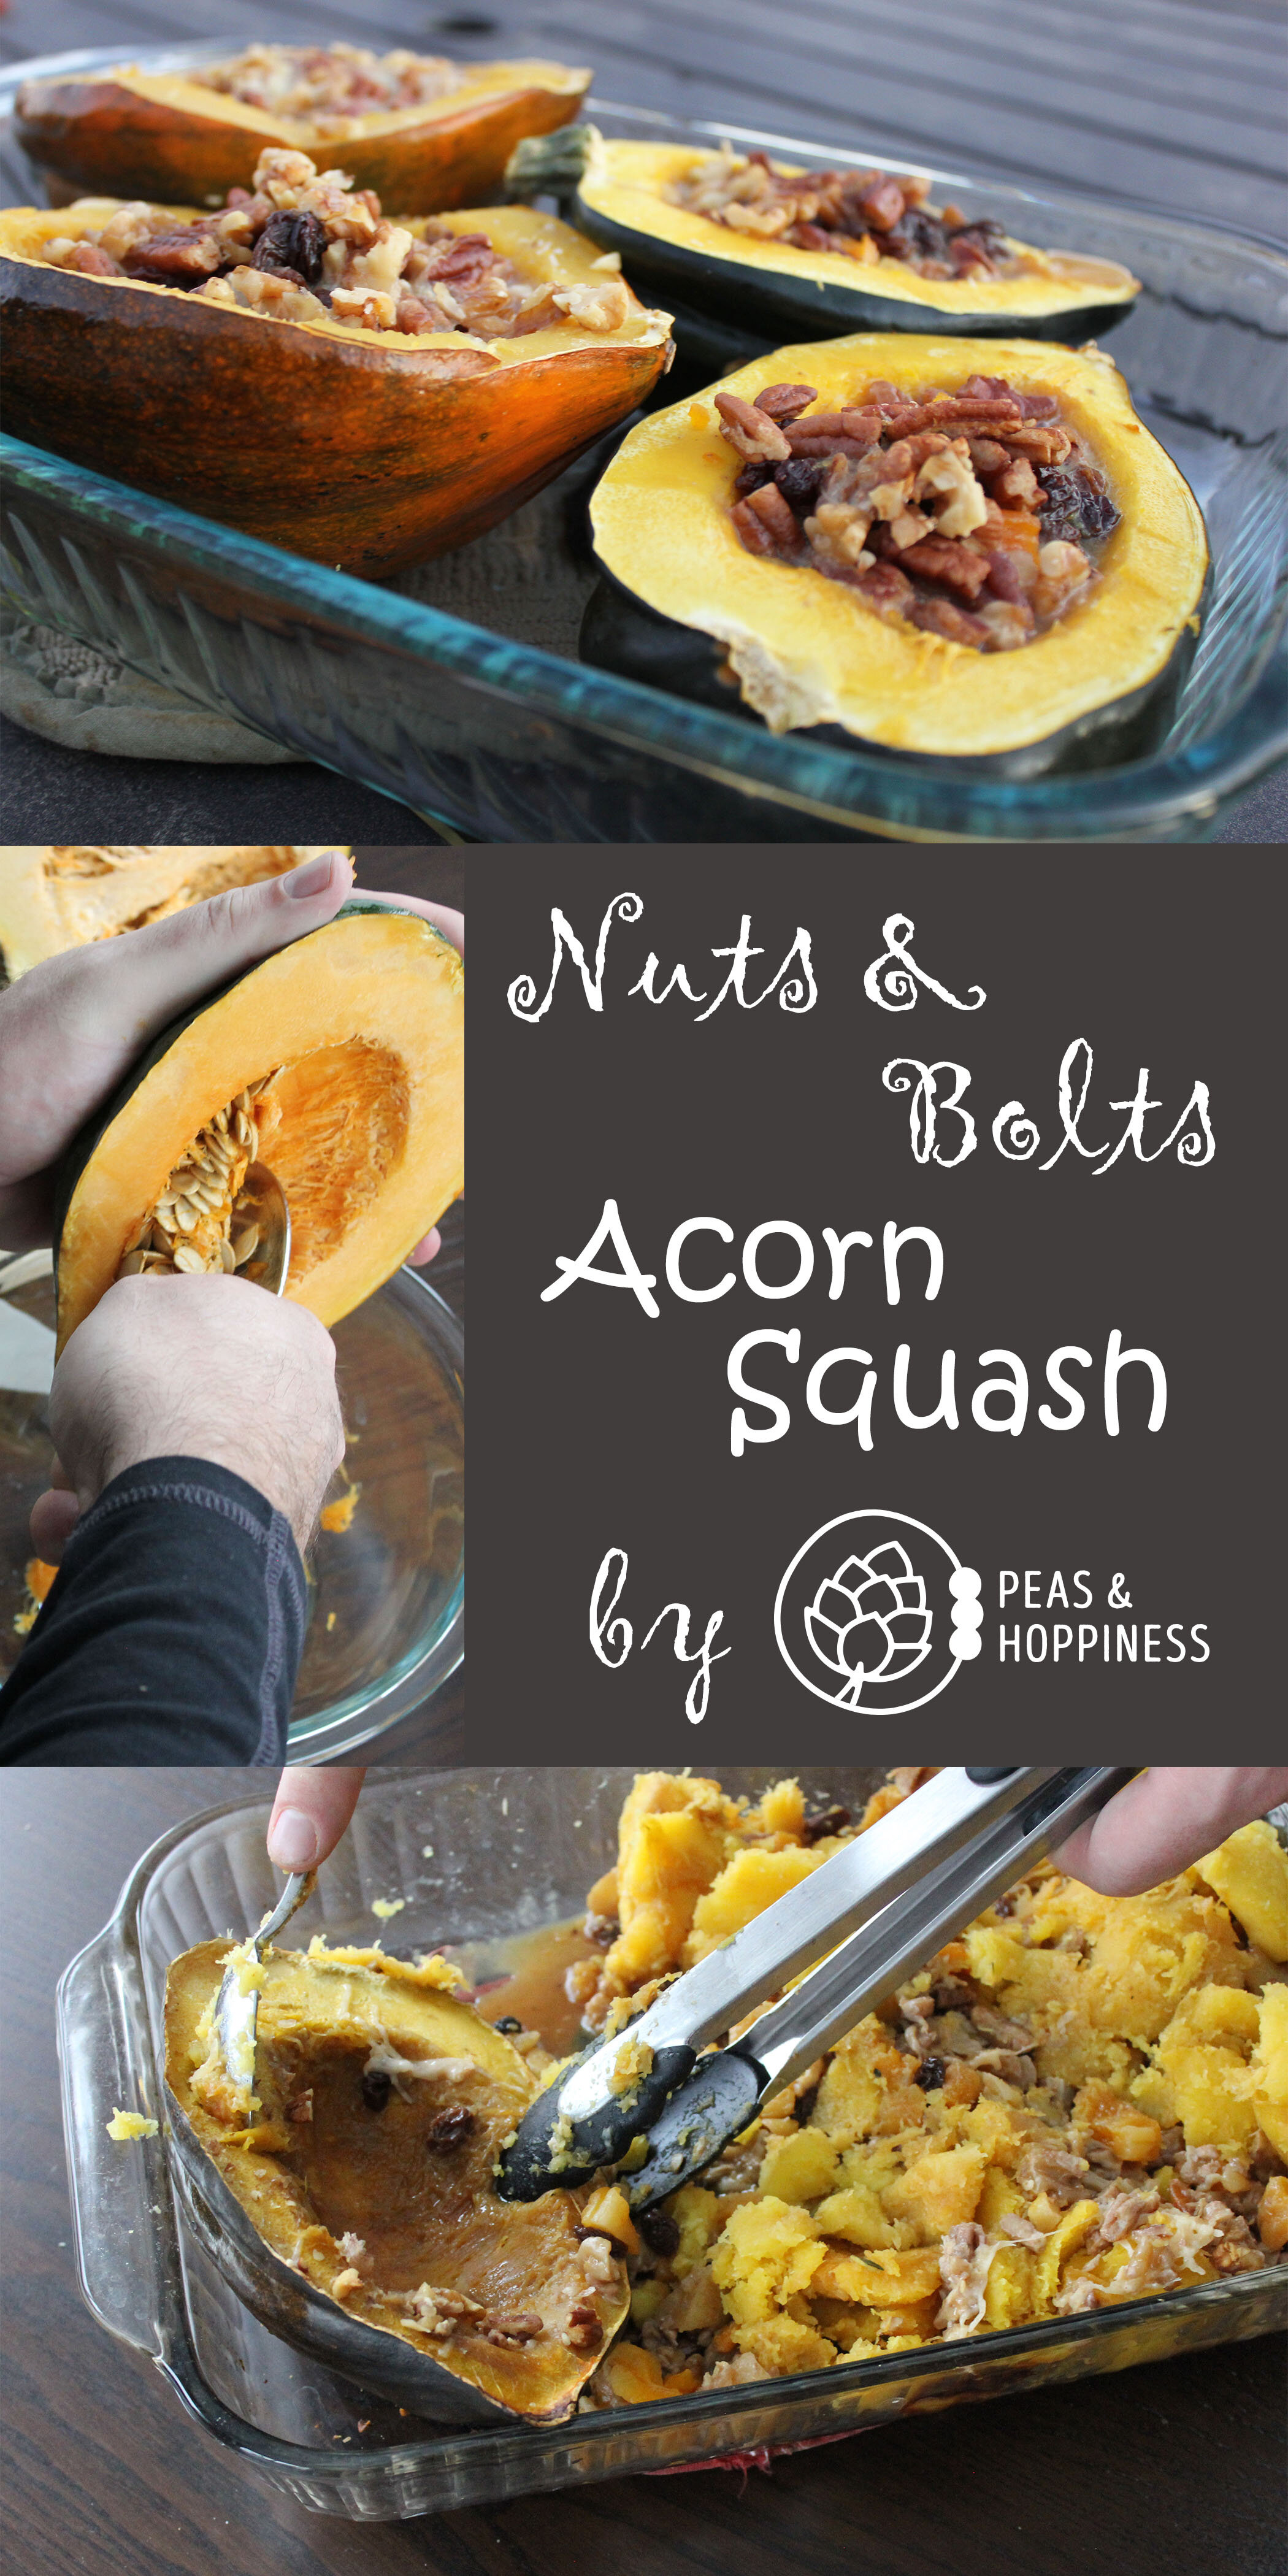 Nuts & Bolts Acorn Squash Recipe from Peas and Hoppiness - www.peasandhoppiness.com